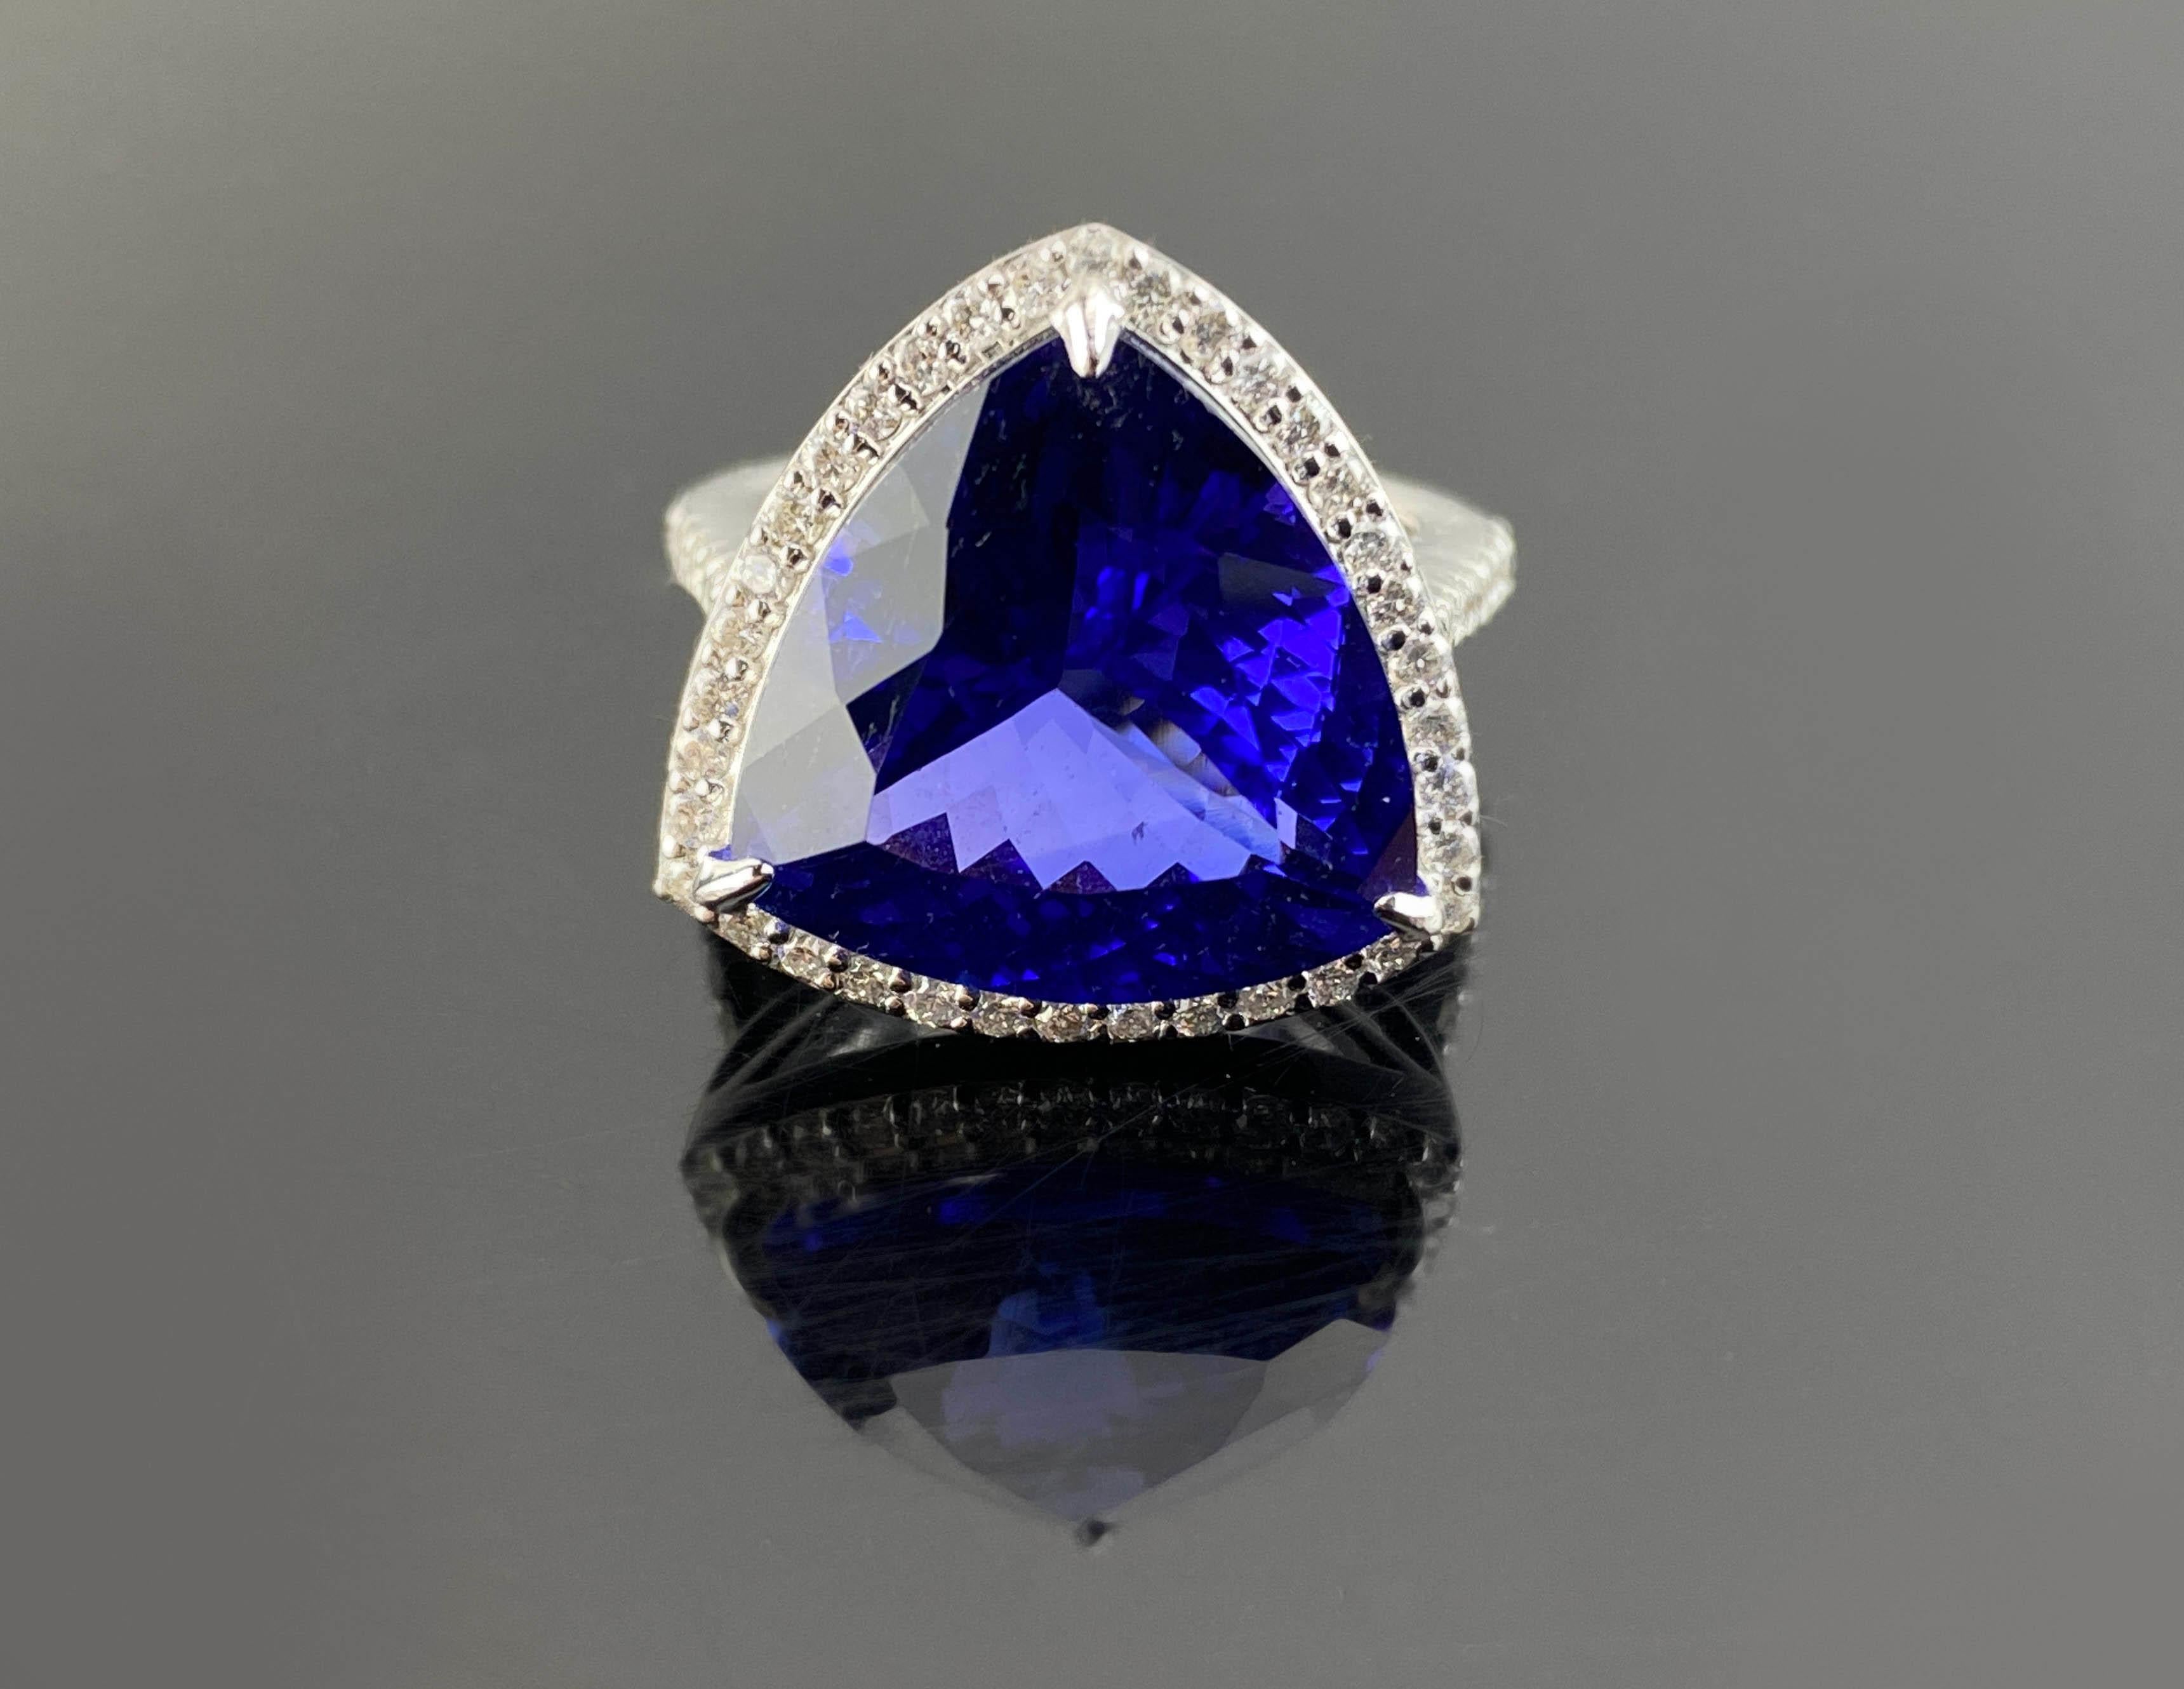 12.54 Carat Trillion Cut Tanzanite and Diamond Cocktail Ring Set in White Gold For Sale 4